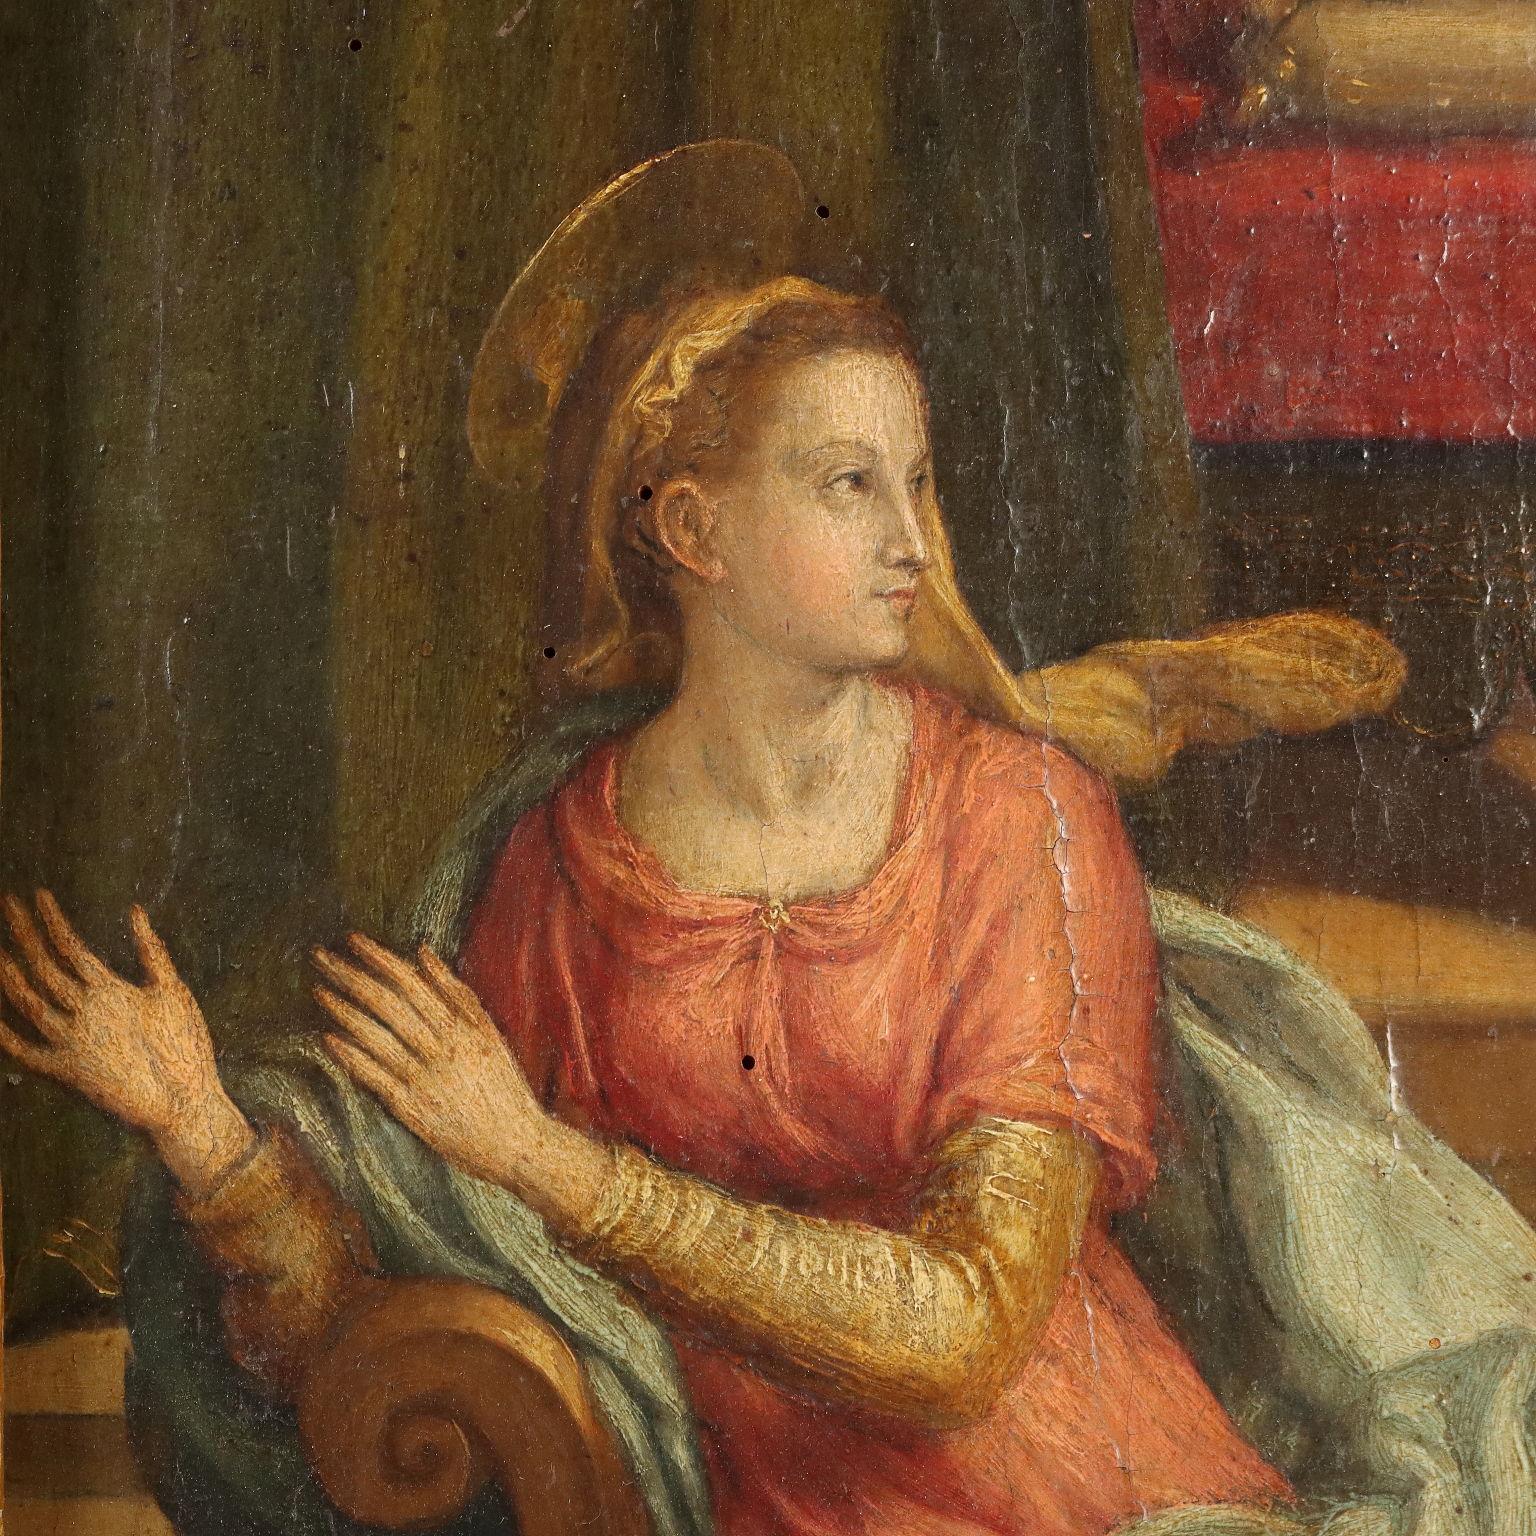 Oil on Board. Central-Italian school of the second half of the 1500s.
The sacred scene of the Annunciation sees the two protagonist figures placed in the foreground in an interior that corresponds to Mary's room.
The young woman is seated in front